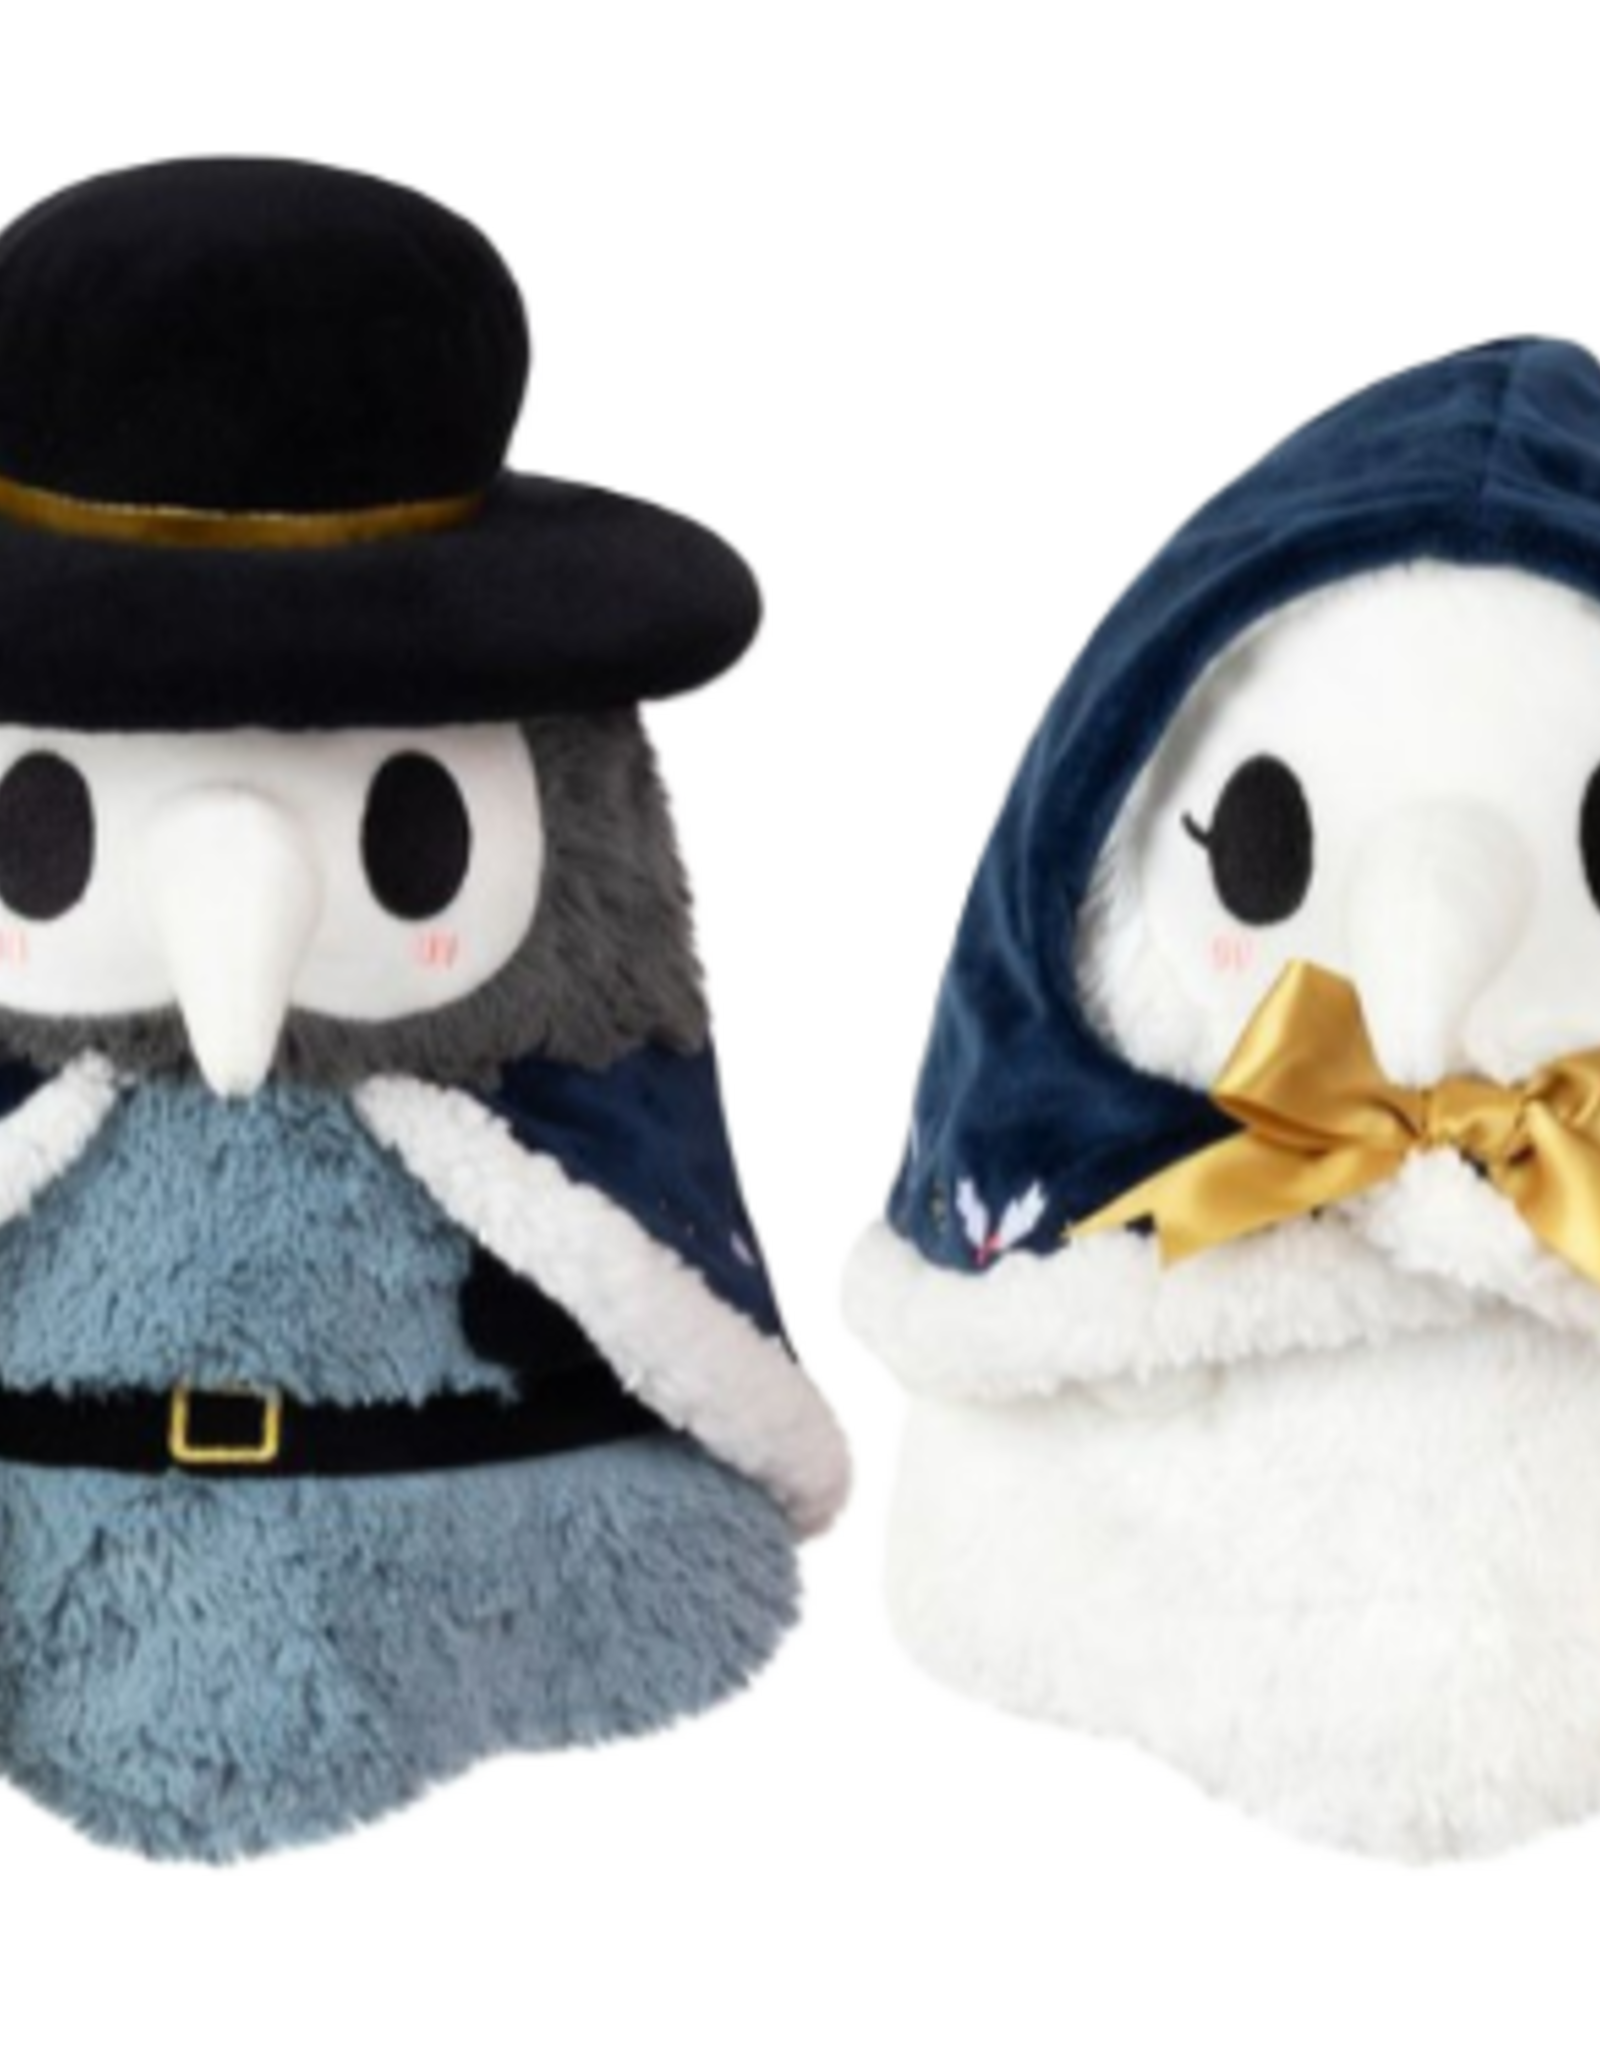 SQUISHABLE FROSTY PLAGUE DUO